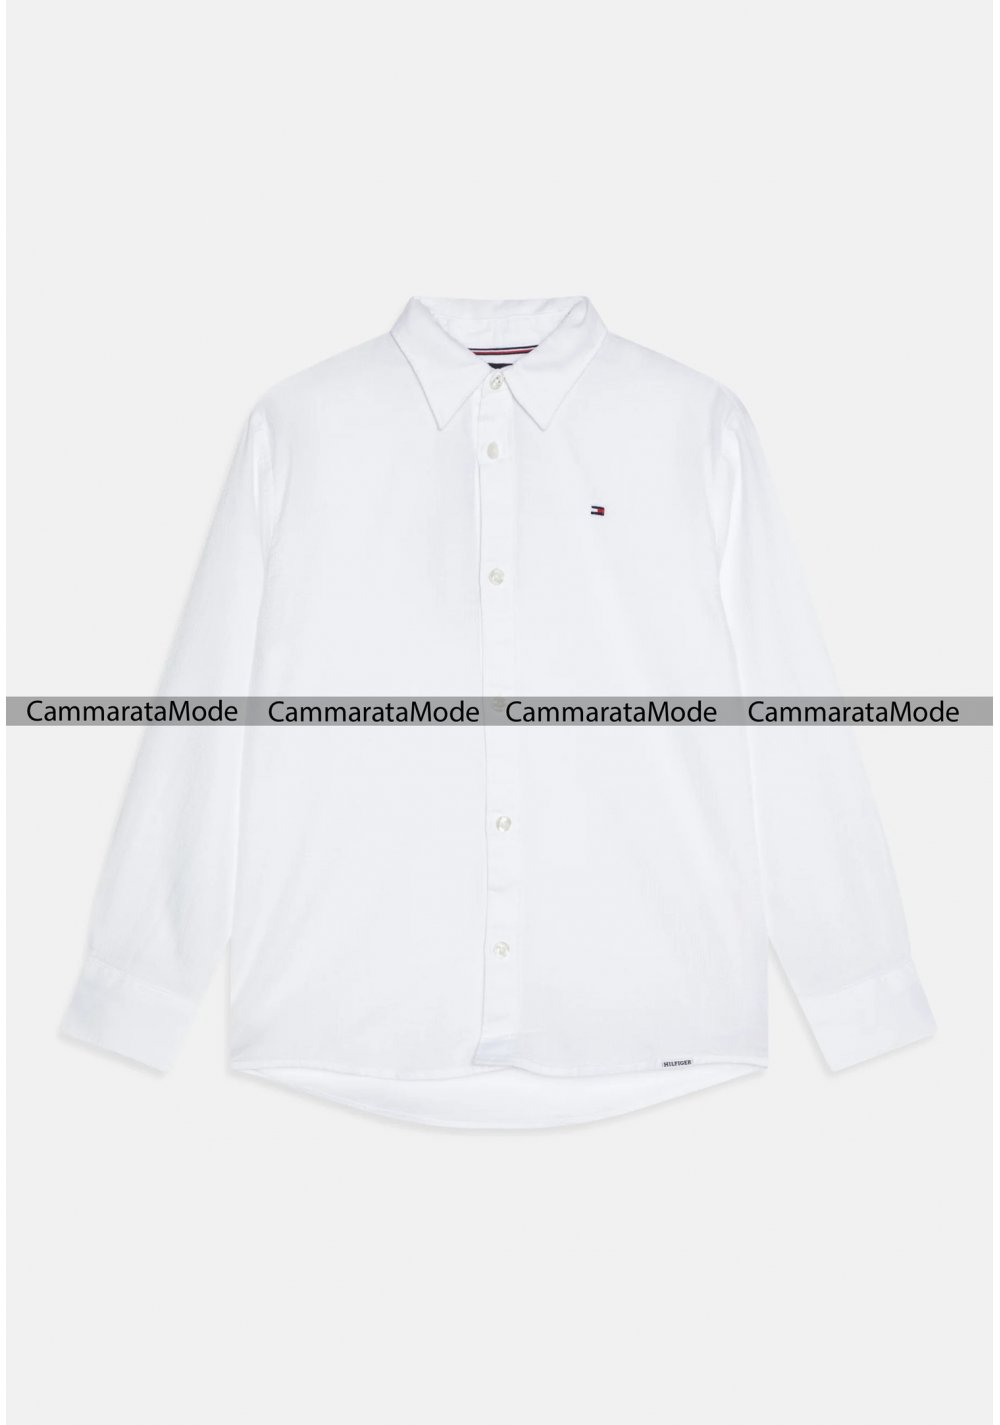 Tommy Hilfiger bambini SOLID - Camicia bianca in cotone